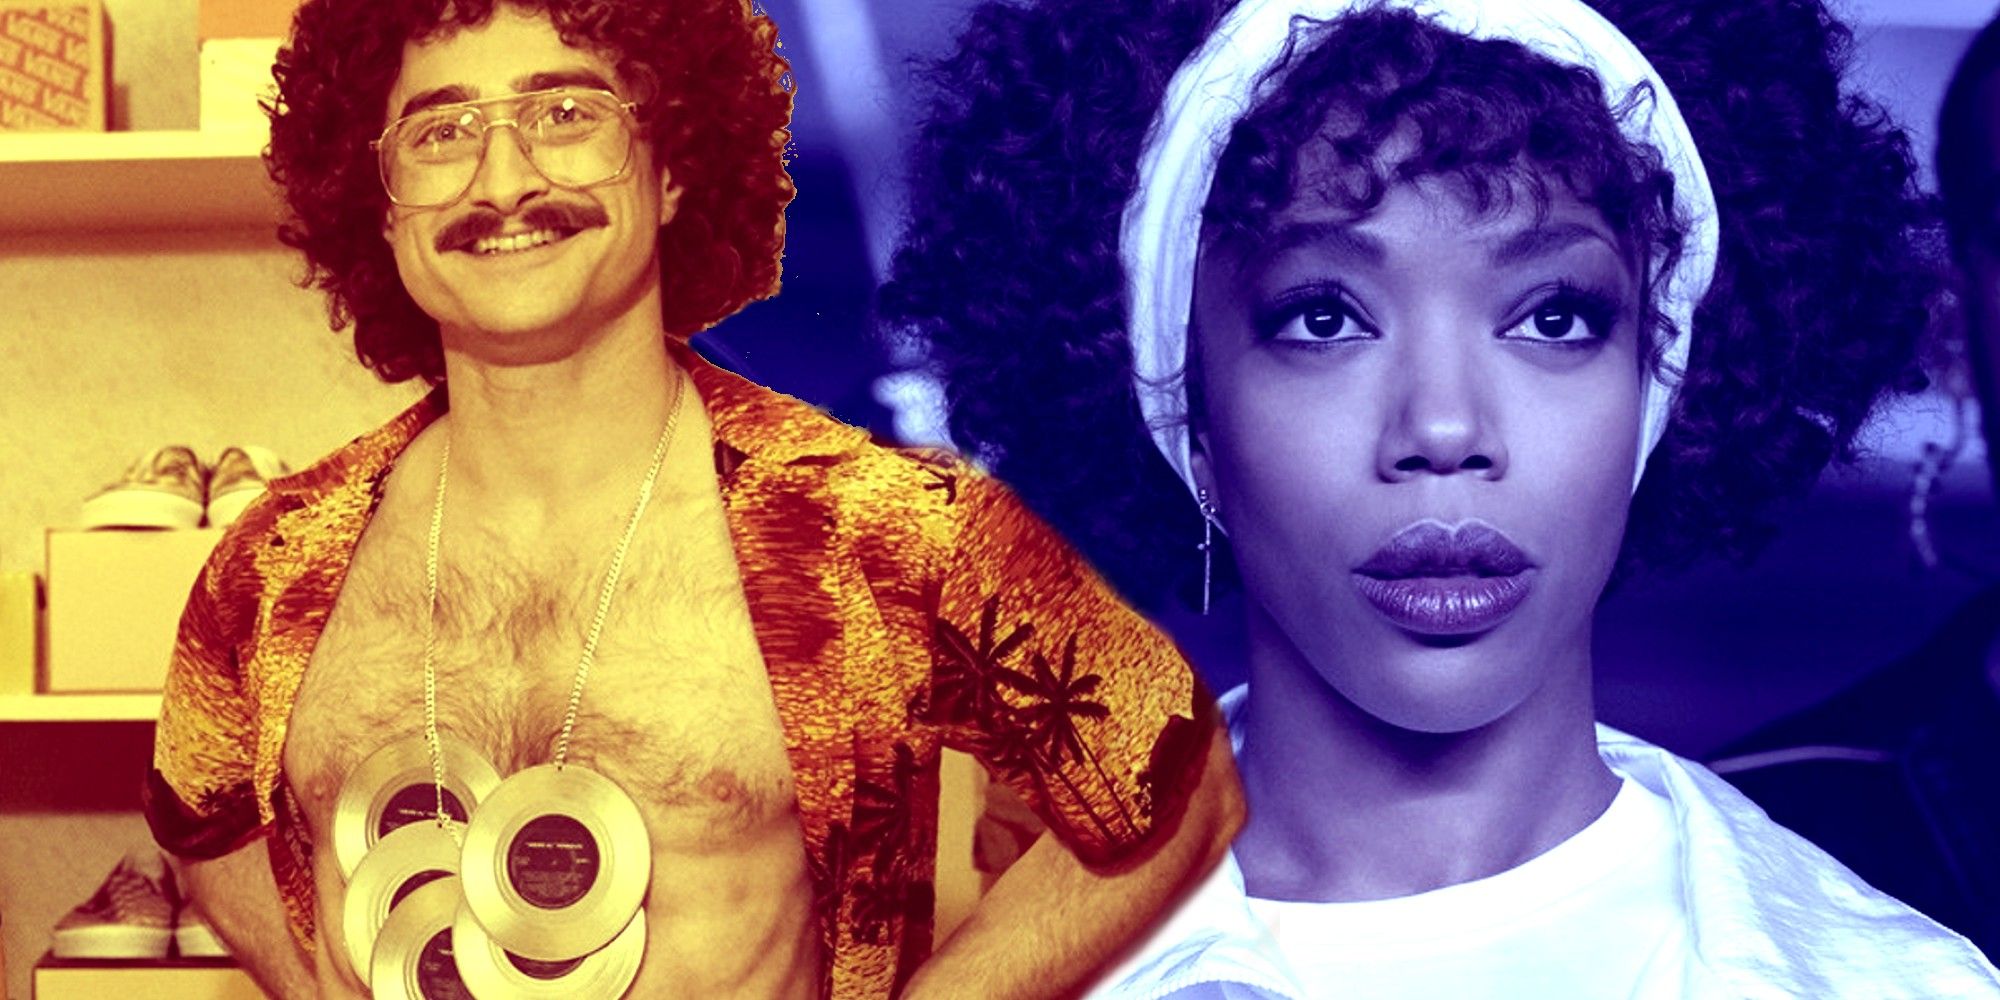 Daniel Radcliffe as Weird-Al in Weird: The Al Yankovic Story and Naomi Ackie as Whitney Houston in Whitney Houston: I Wanna Dance With Somebody